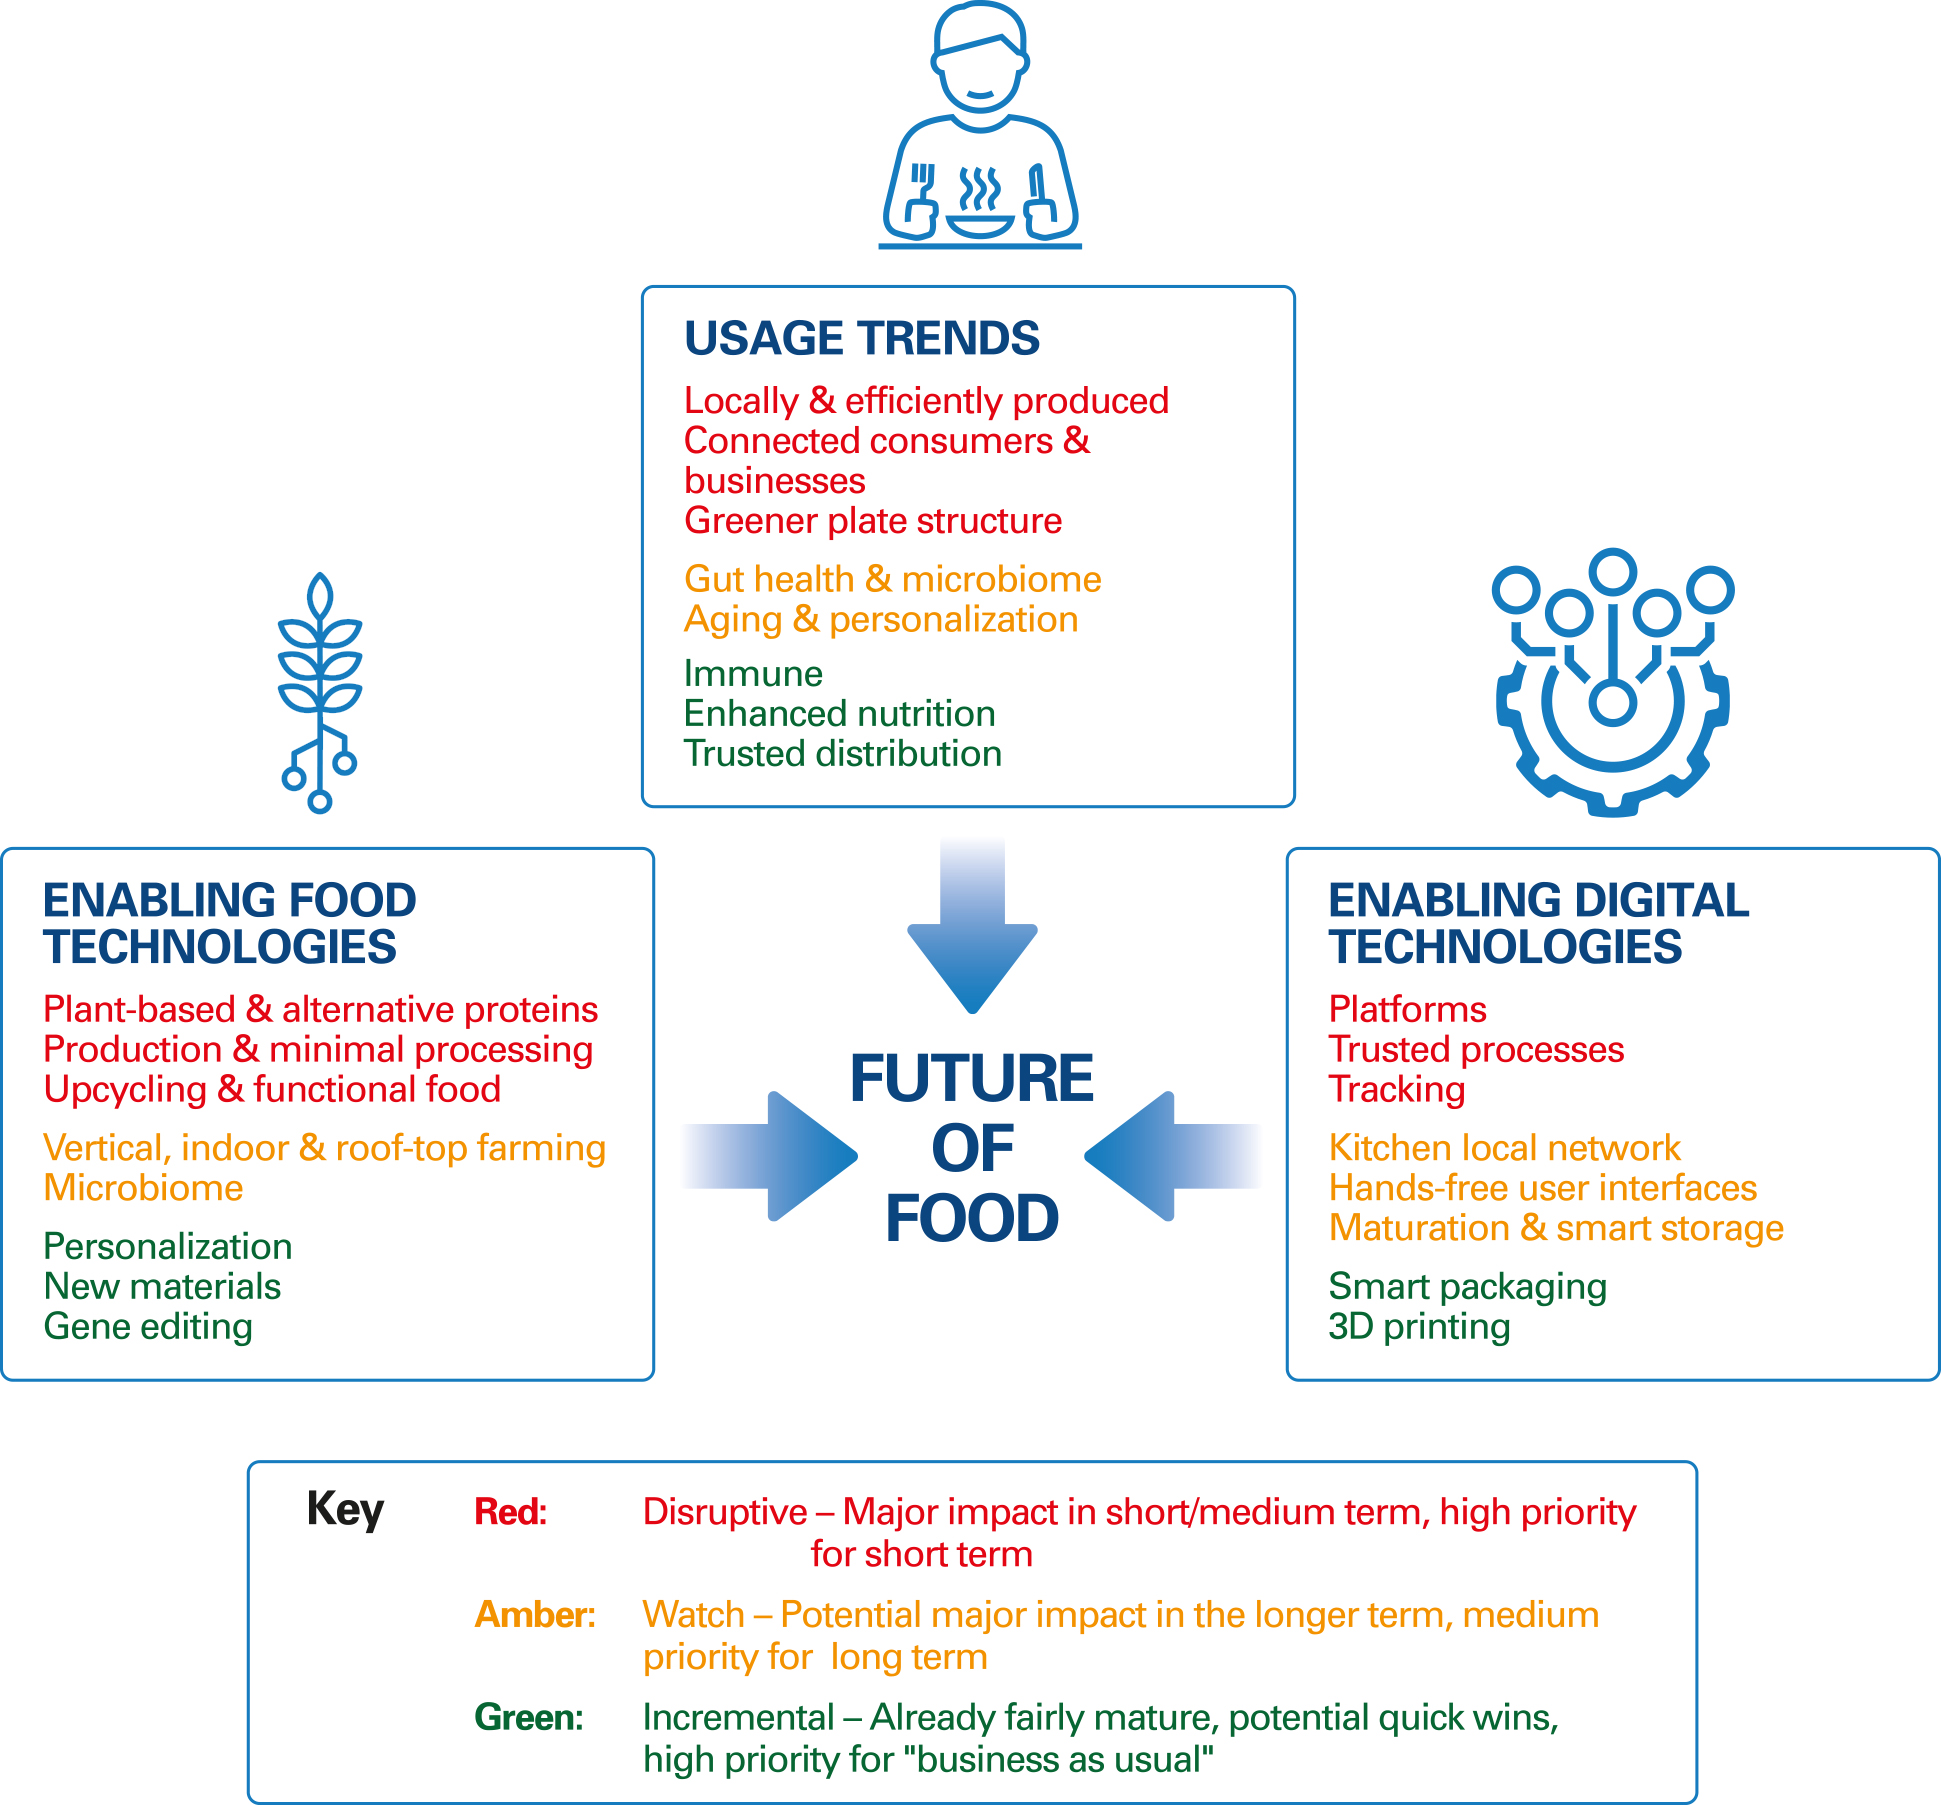 Figure 1: Trends shaping the future of food